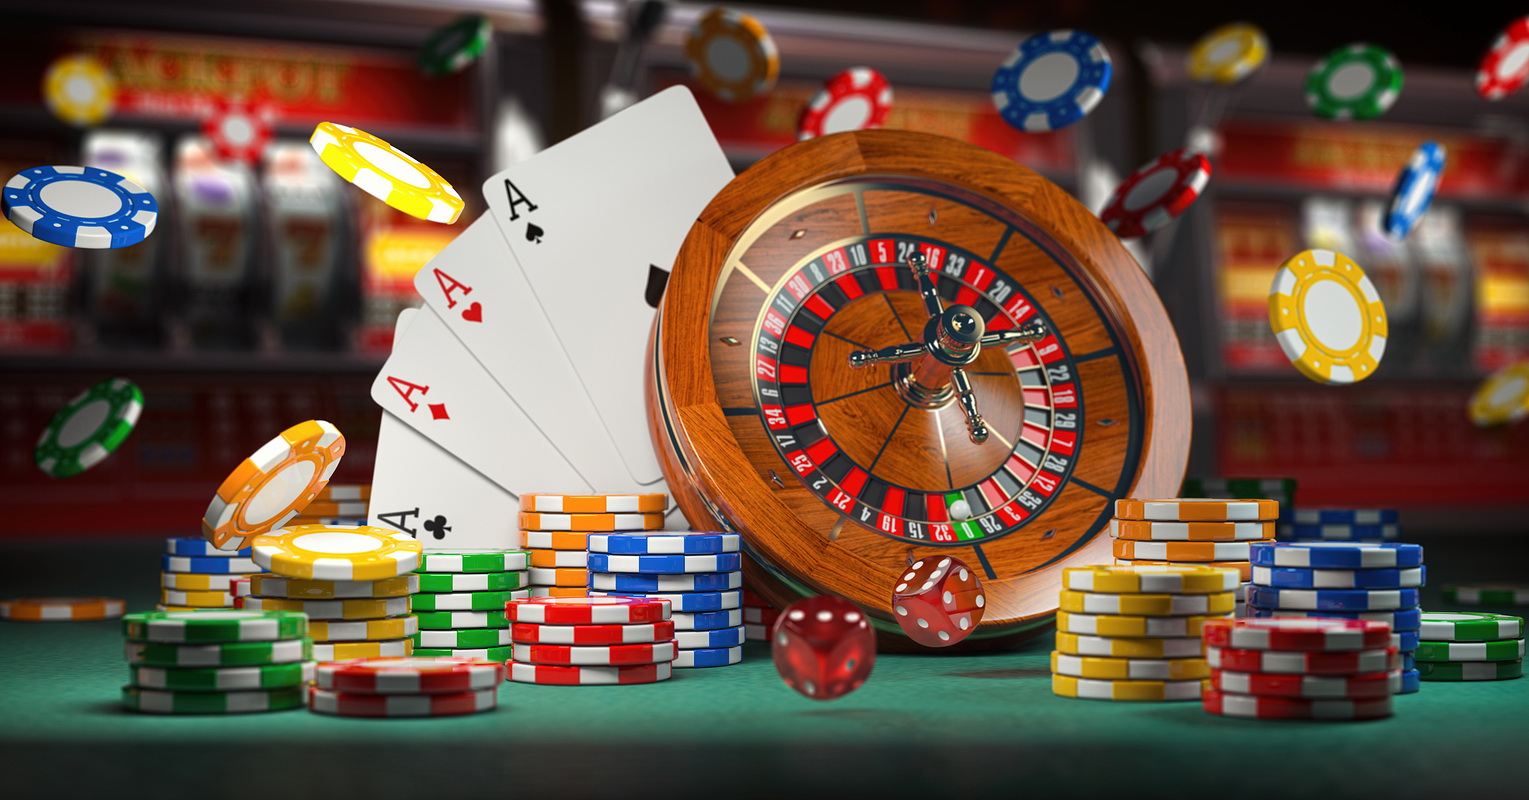 Top 10 Biggest Casinos in the World - 2022 Guide